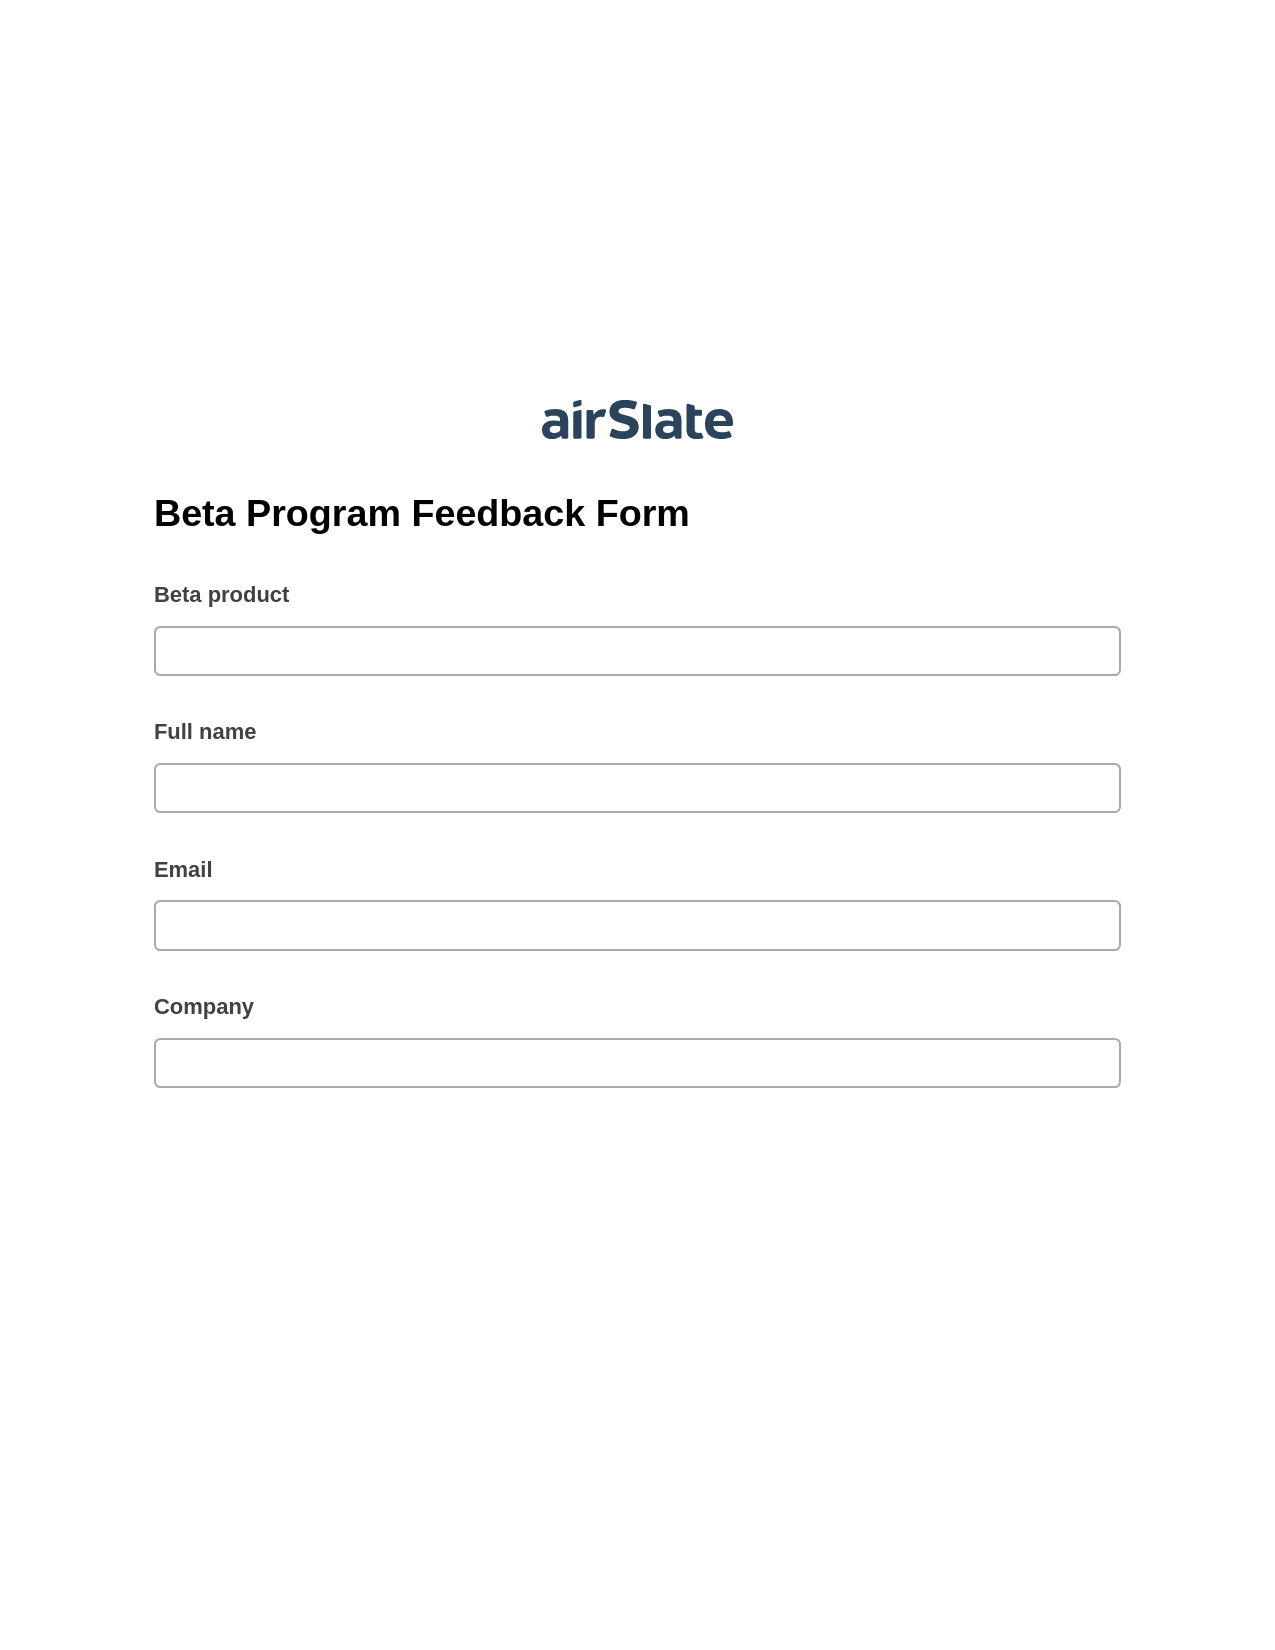 Beta Program Feedback Form Pre-fill from Salesforce Record Bot, Open as Role Bot, Export to Excel 365 Bot